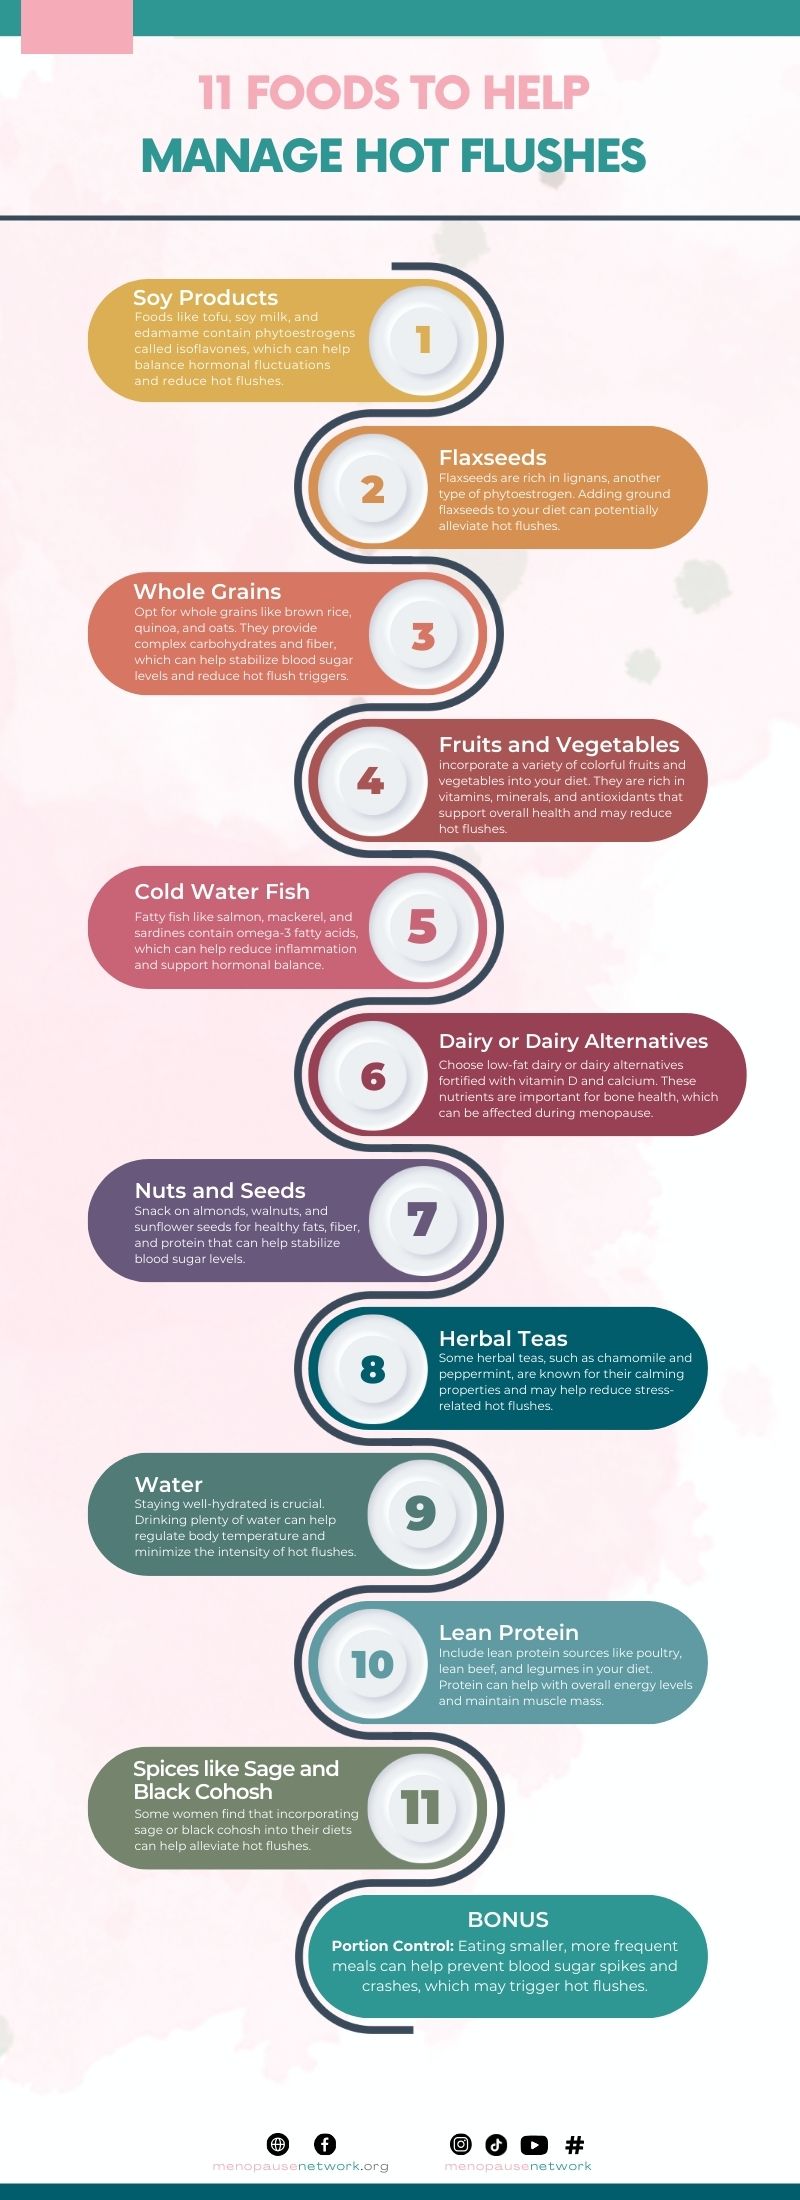 Infographic-11-Foods-to-Help-Manage-Hot-Flushes